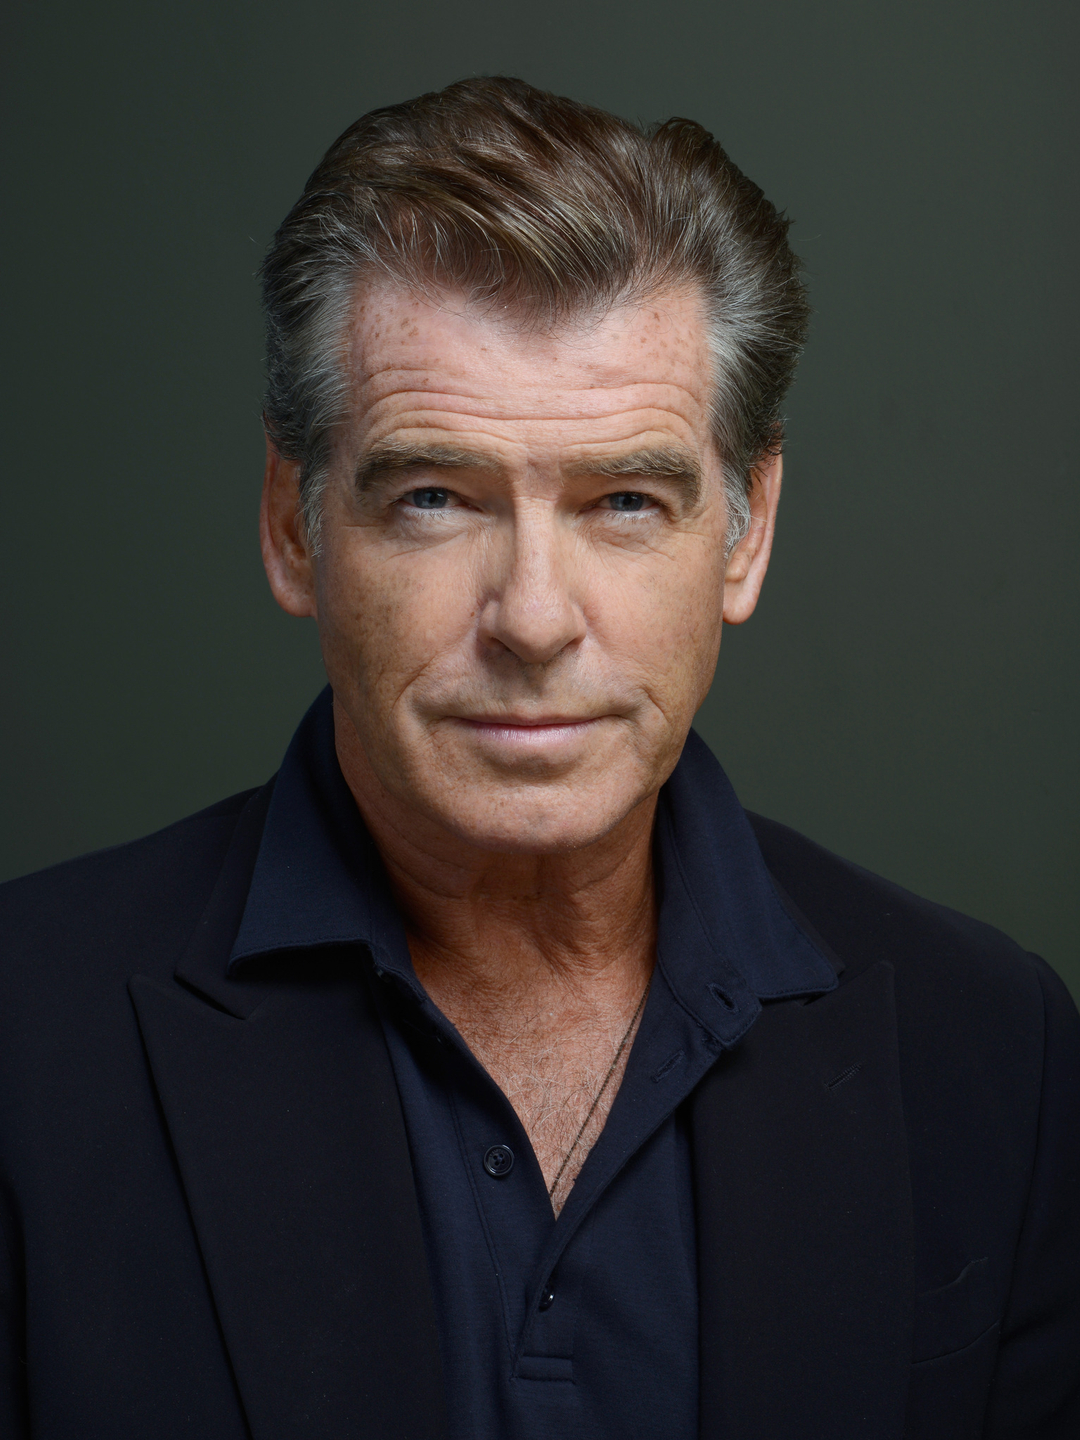 Pierce Brosnan in his youth